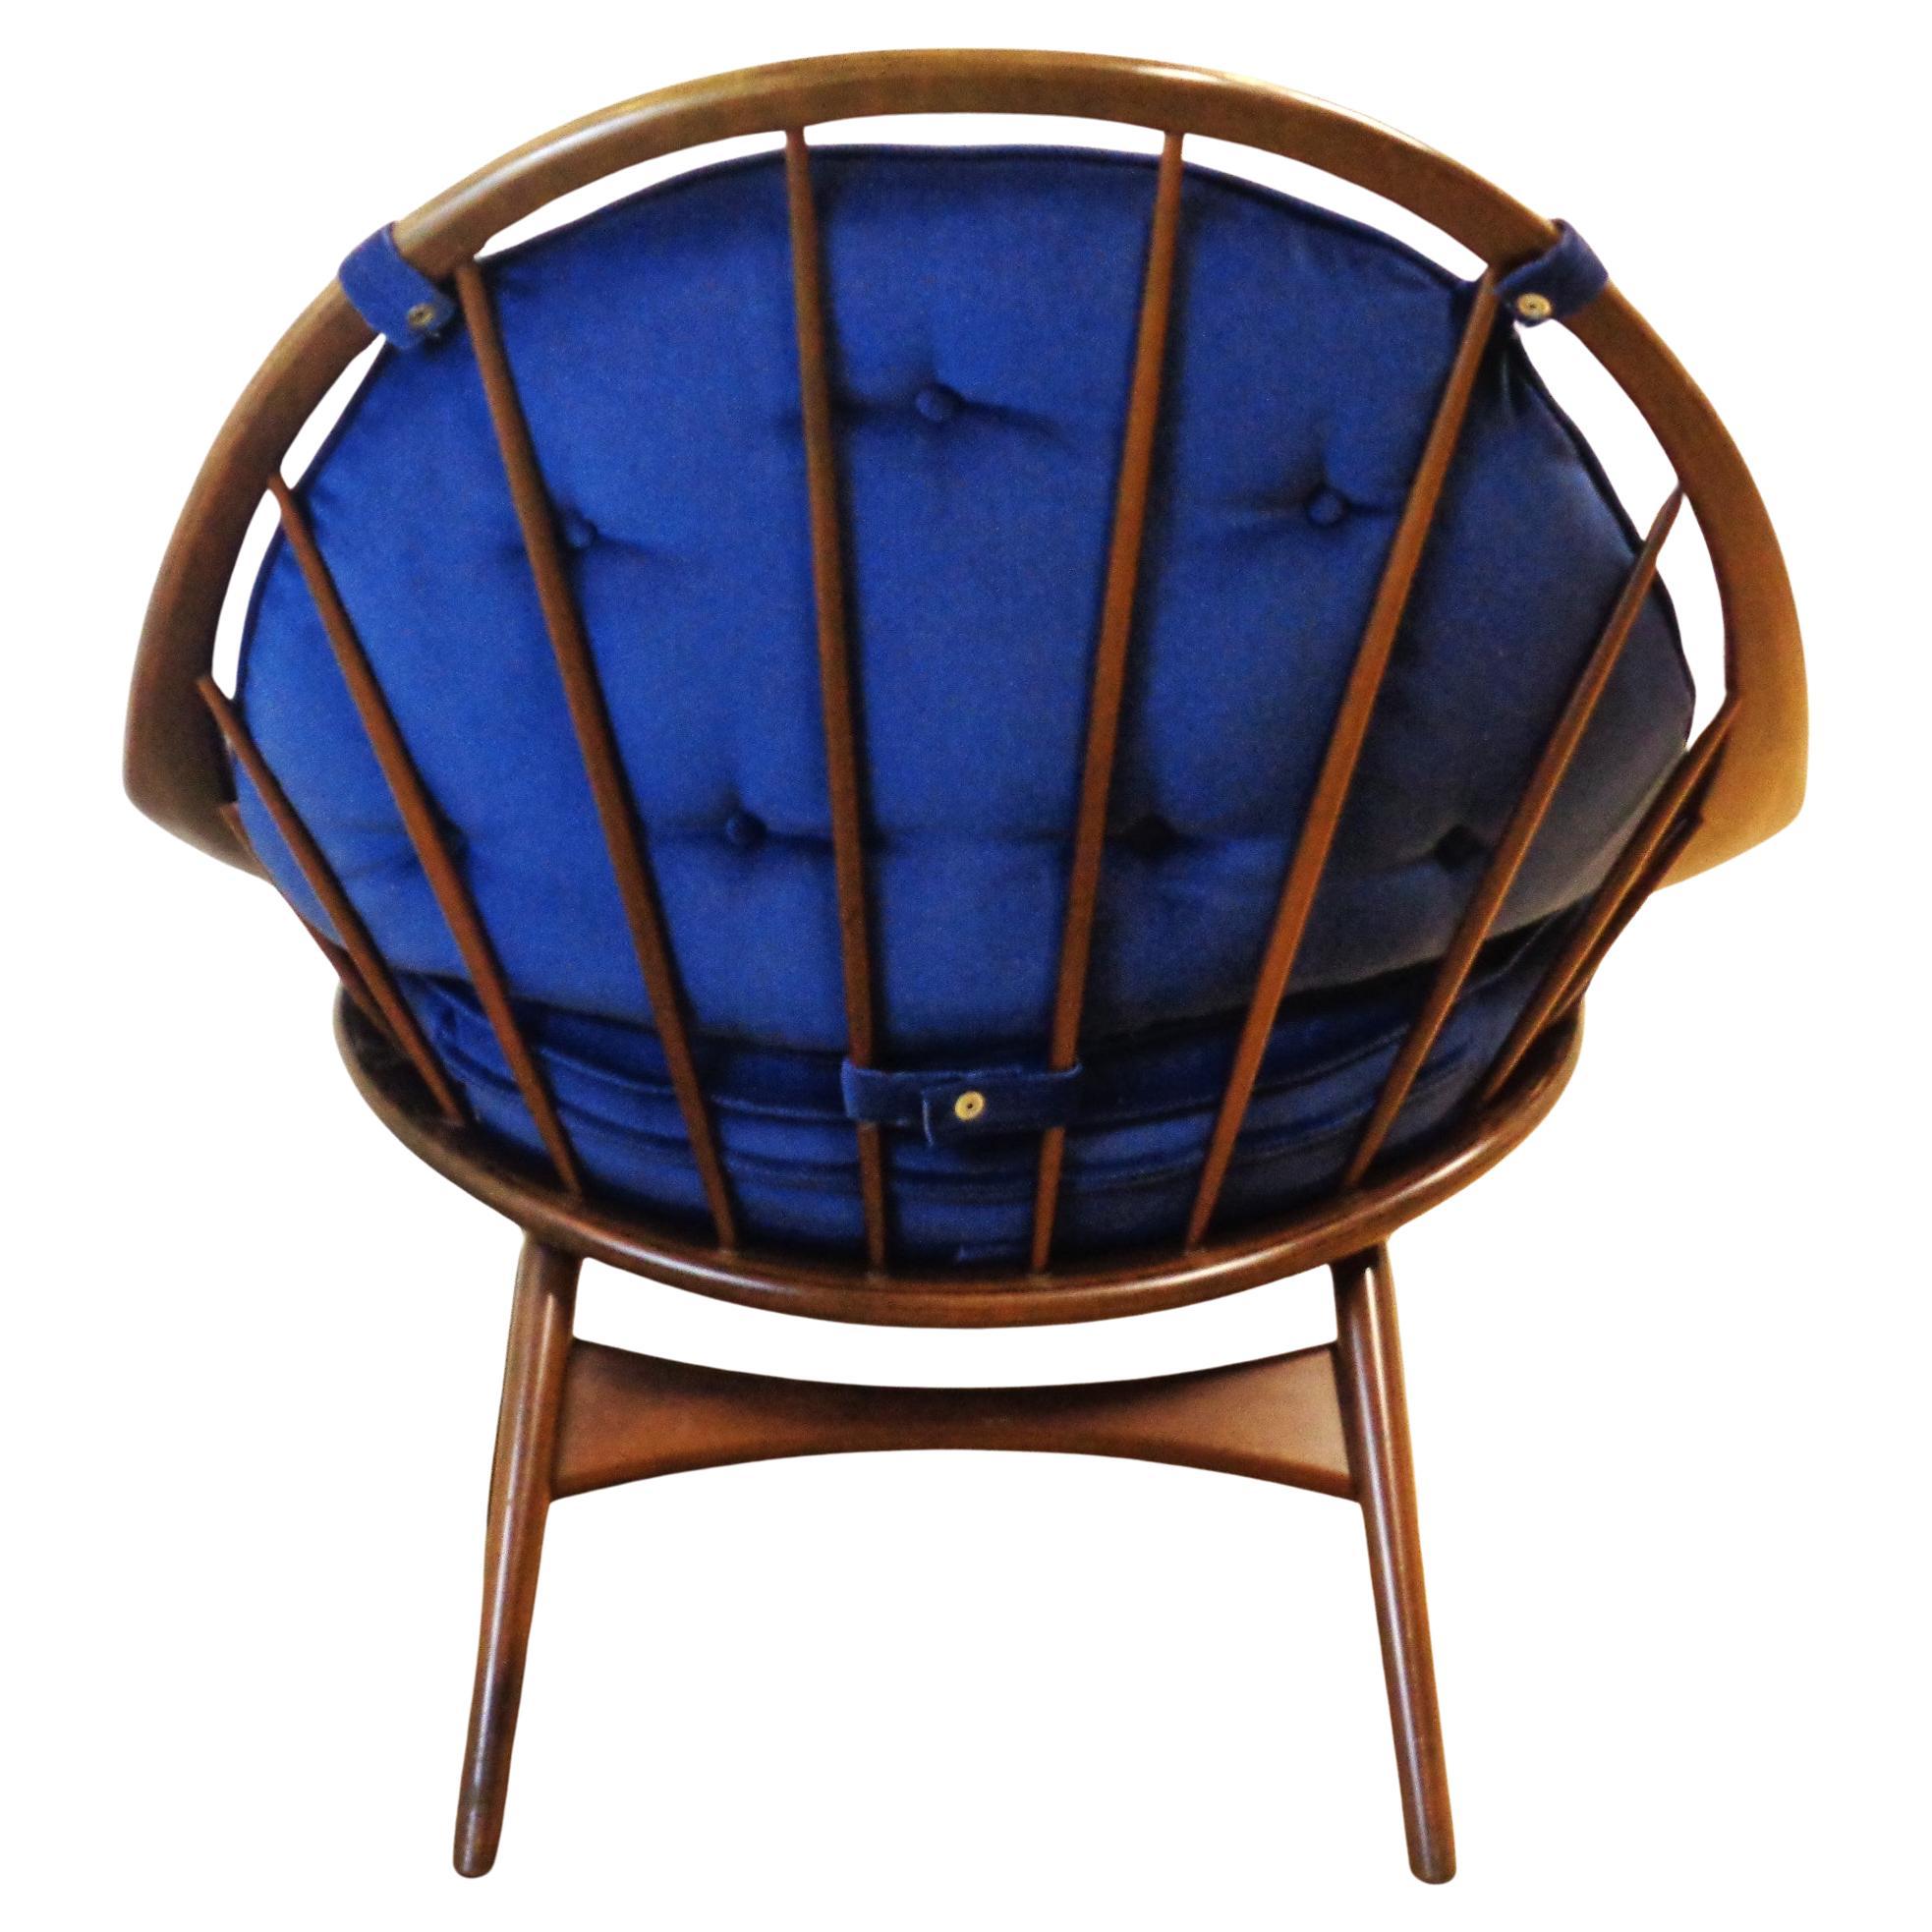 Ib Kofod-Larsen Peacock Chair Selig Denmark, 1950-1960 In Good Condition For Sale In Rochester, NY